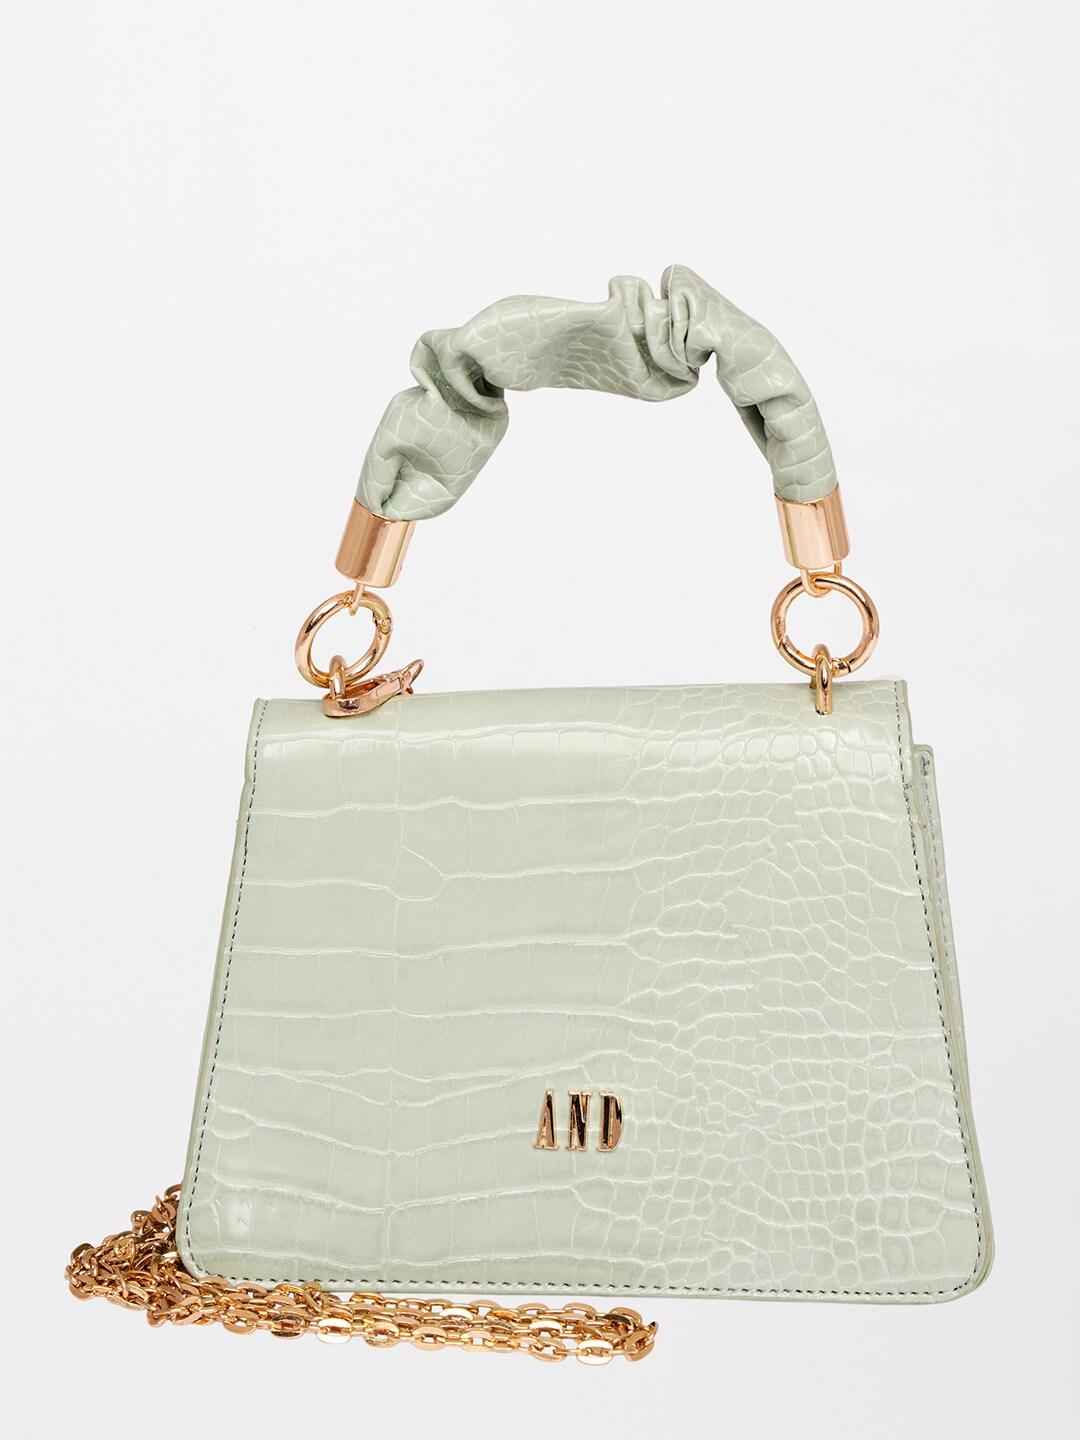 AND Women Sea Green Textured PU Structured Handheld Bag